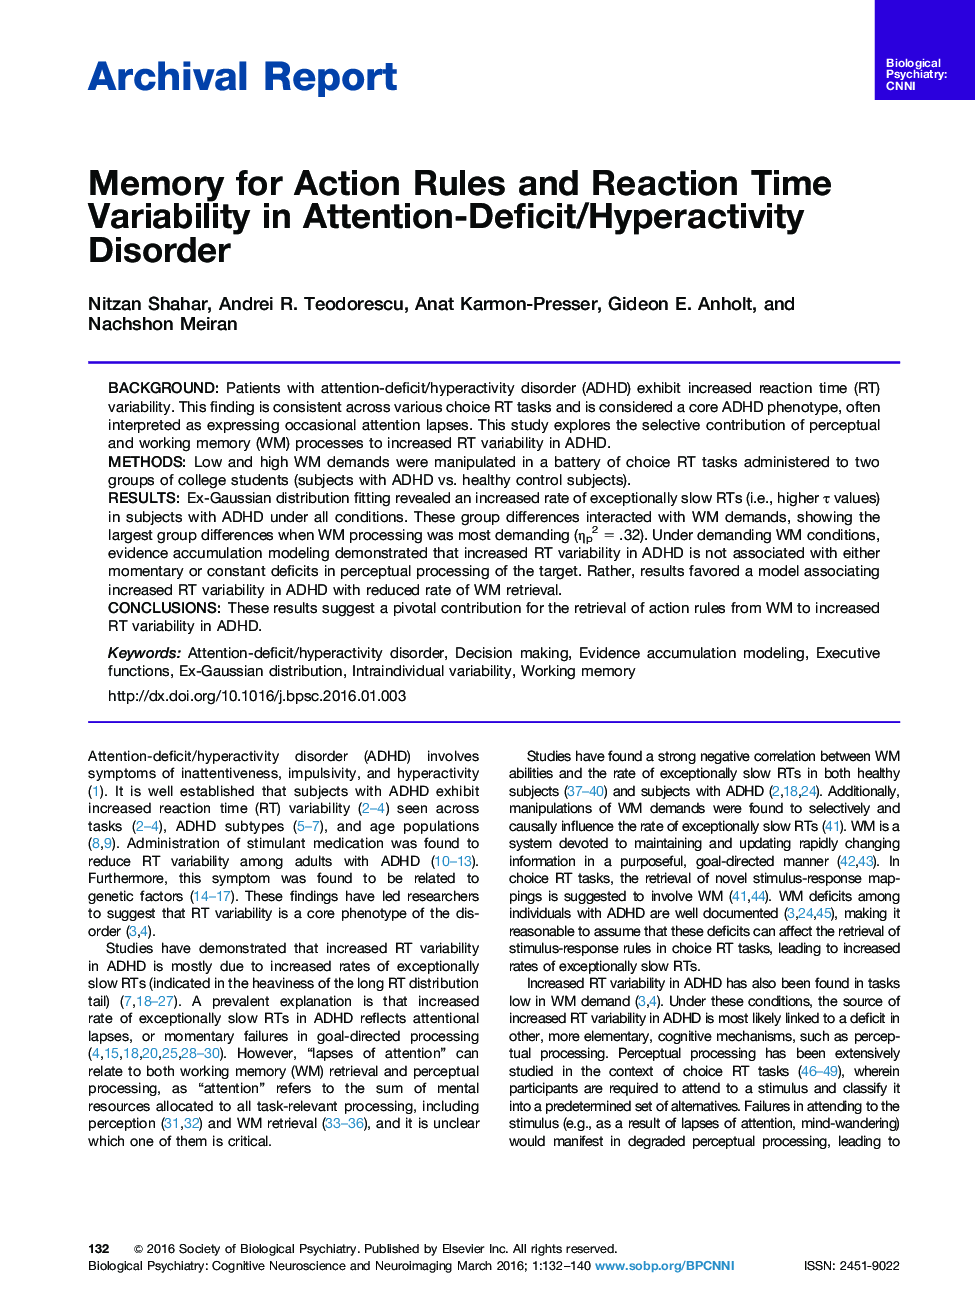 Memory for Action Rules and Reaction Time Variability in Attention-Deficit/Hyperactivity Disorder